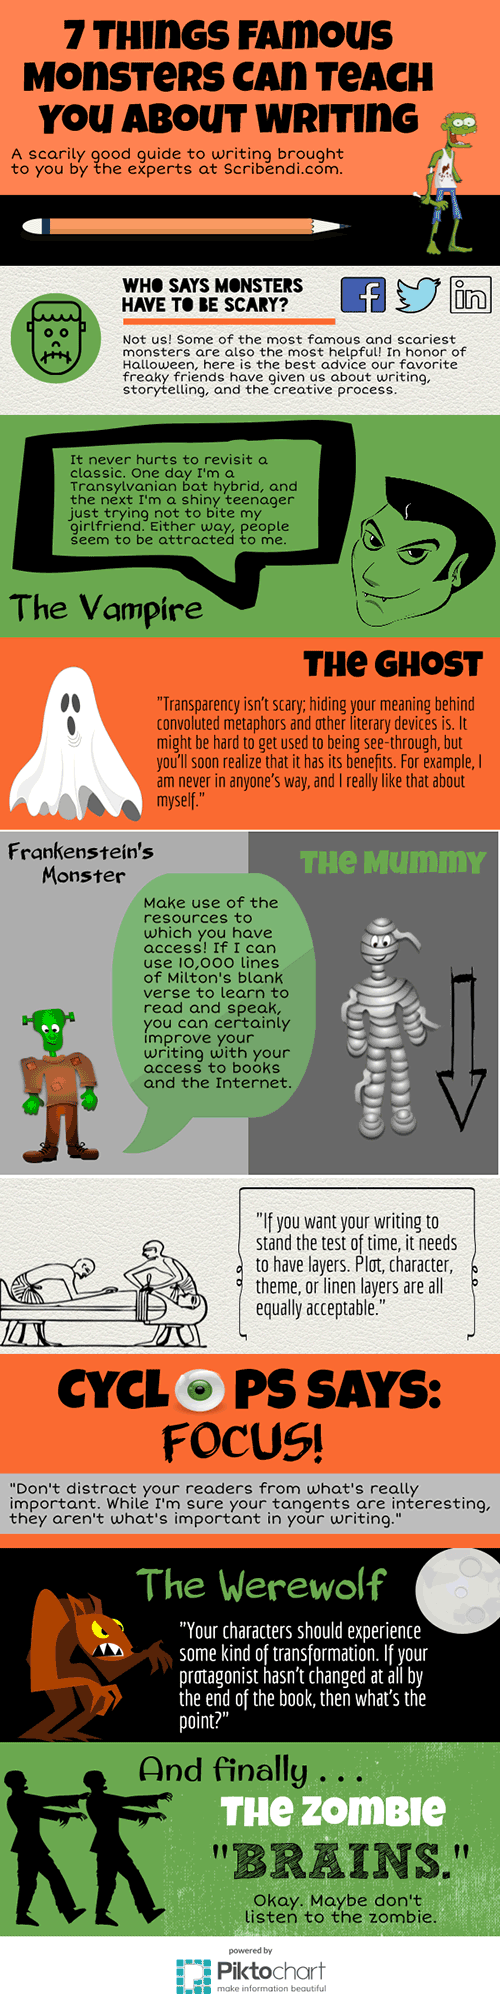 7 Things Famous Monsters Can Teach You about Writing Infographic